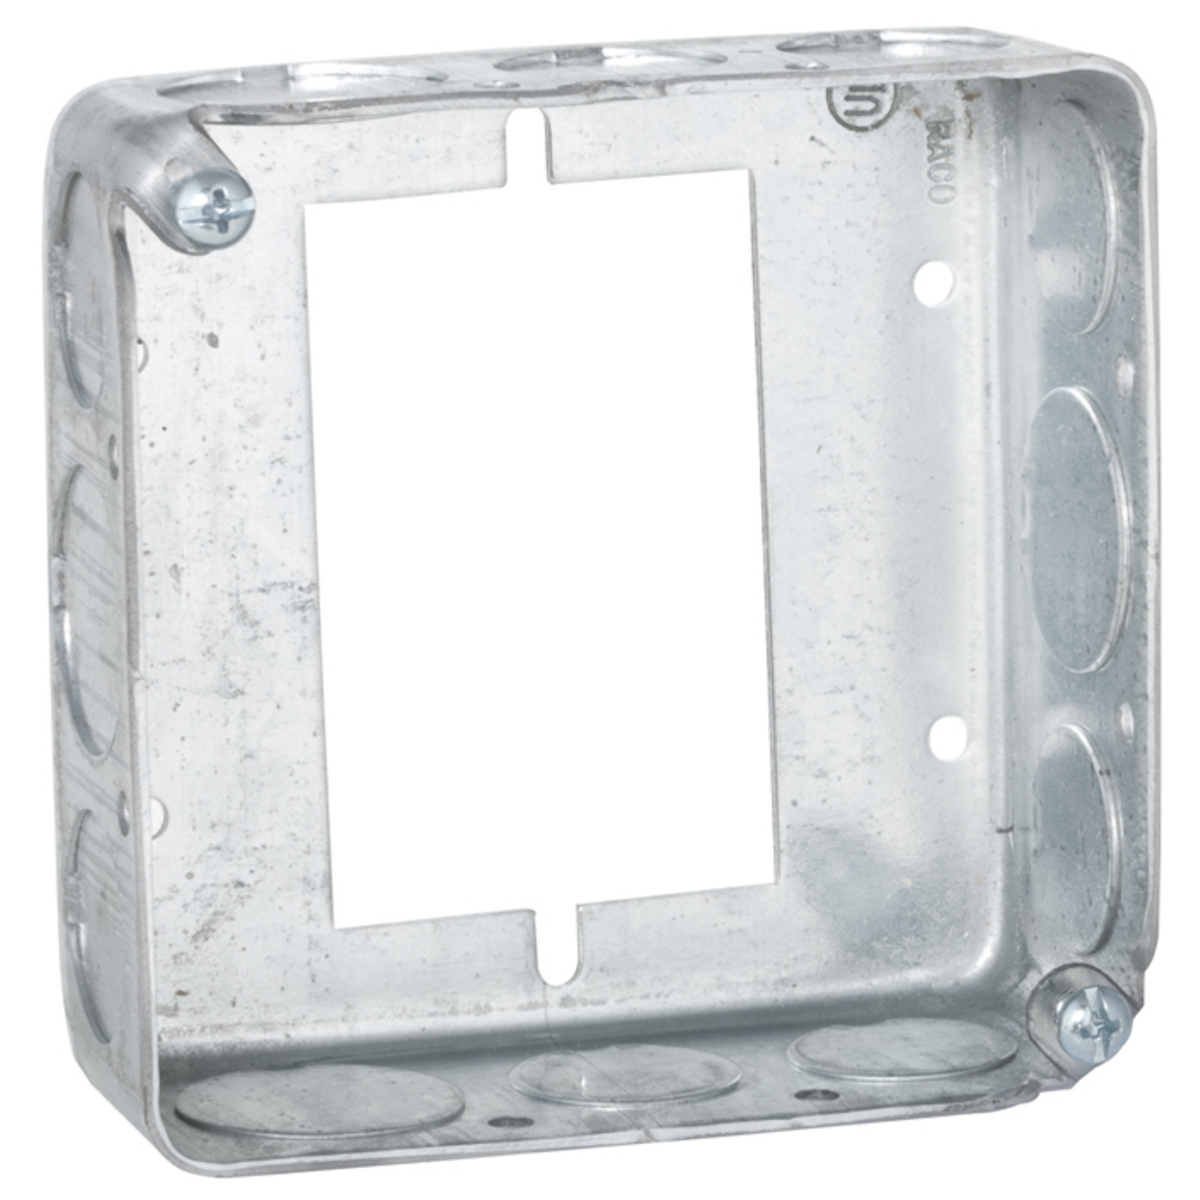 RACO 187 4" SQUARE EXTENSION FOR A 1G SWITCH BOX, 1-1/2" DEEP, 1/2" & 3/4" SIDE KNOCKOUTS,